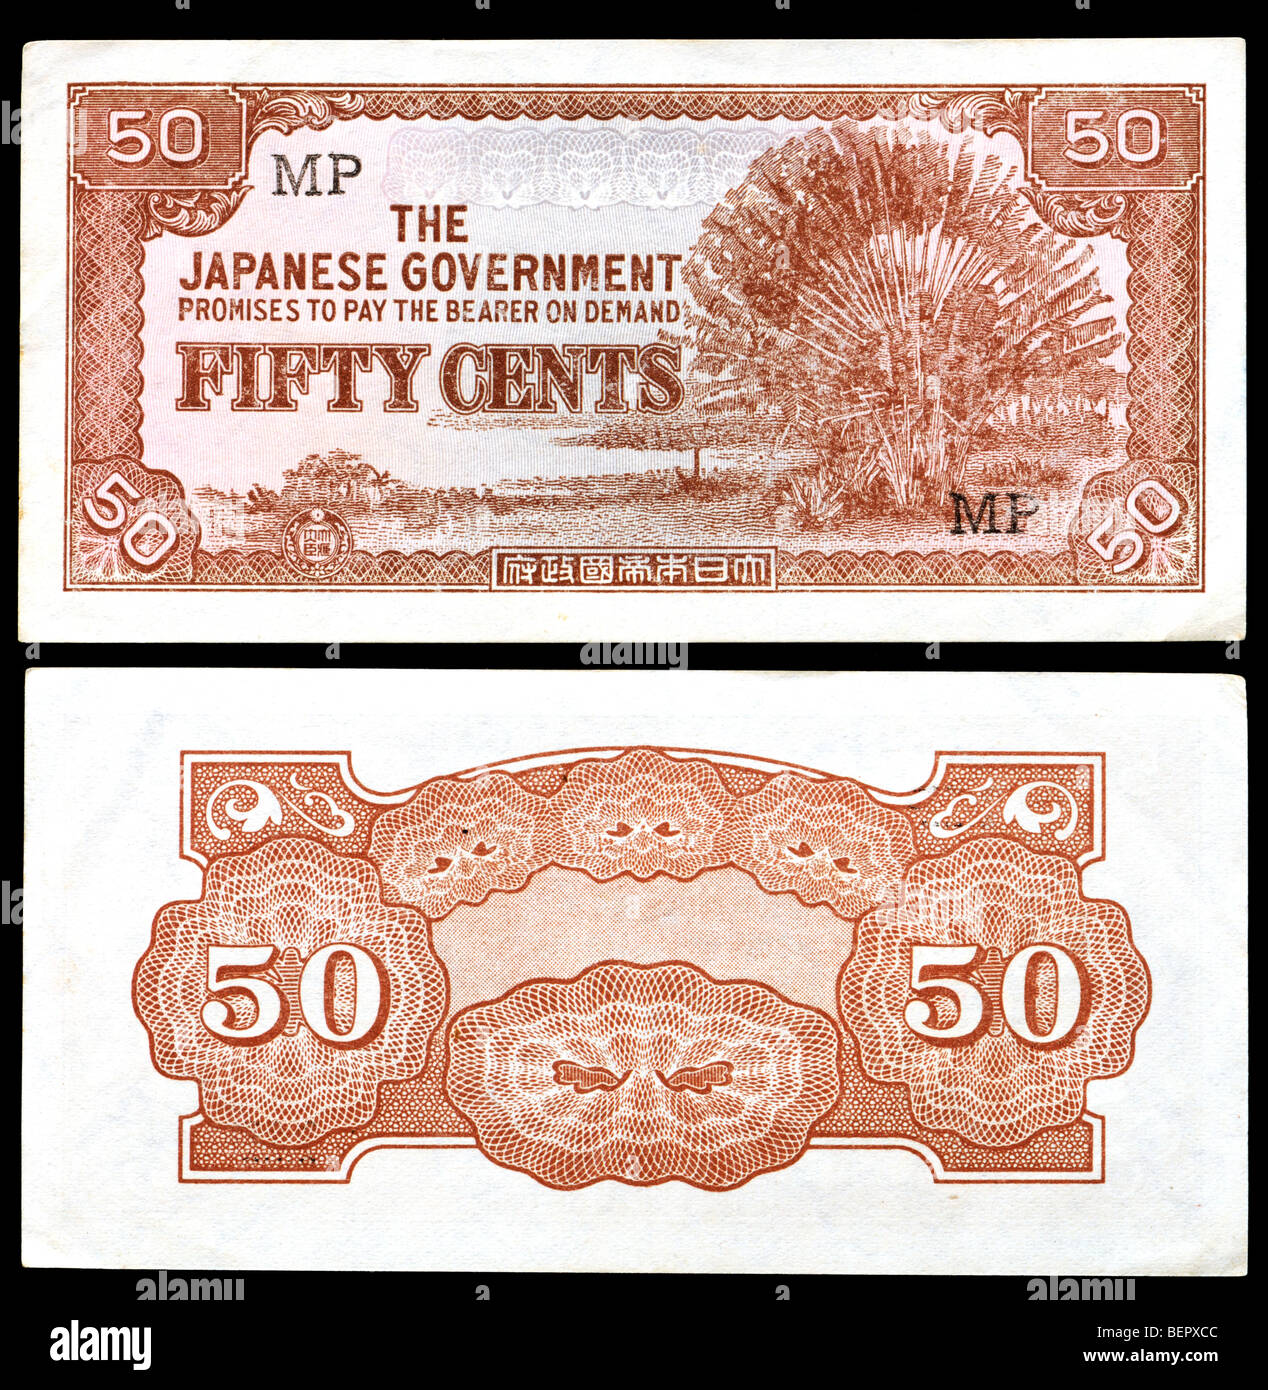 Fifty cent banknote issued by the Japanese Government during the Japanese Occupation of Malaya 1942-1945. 'Banana Money' Stock Photo